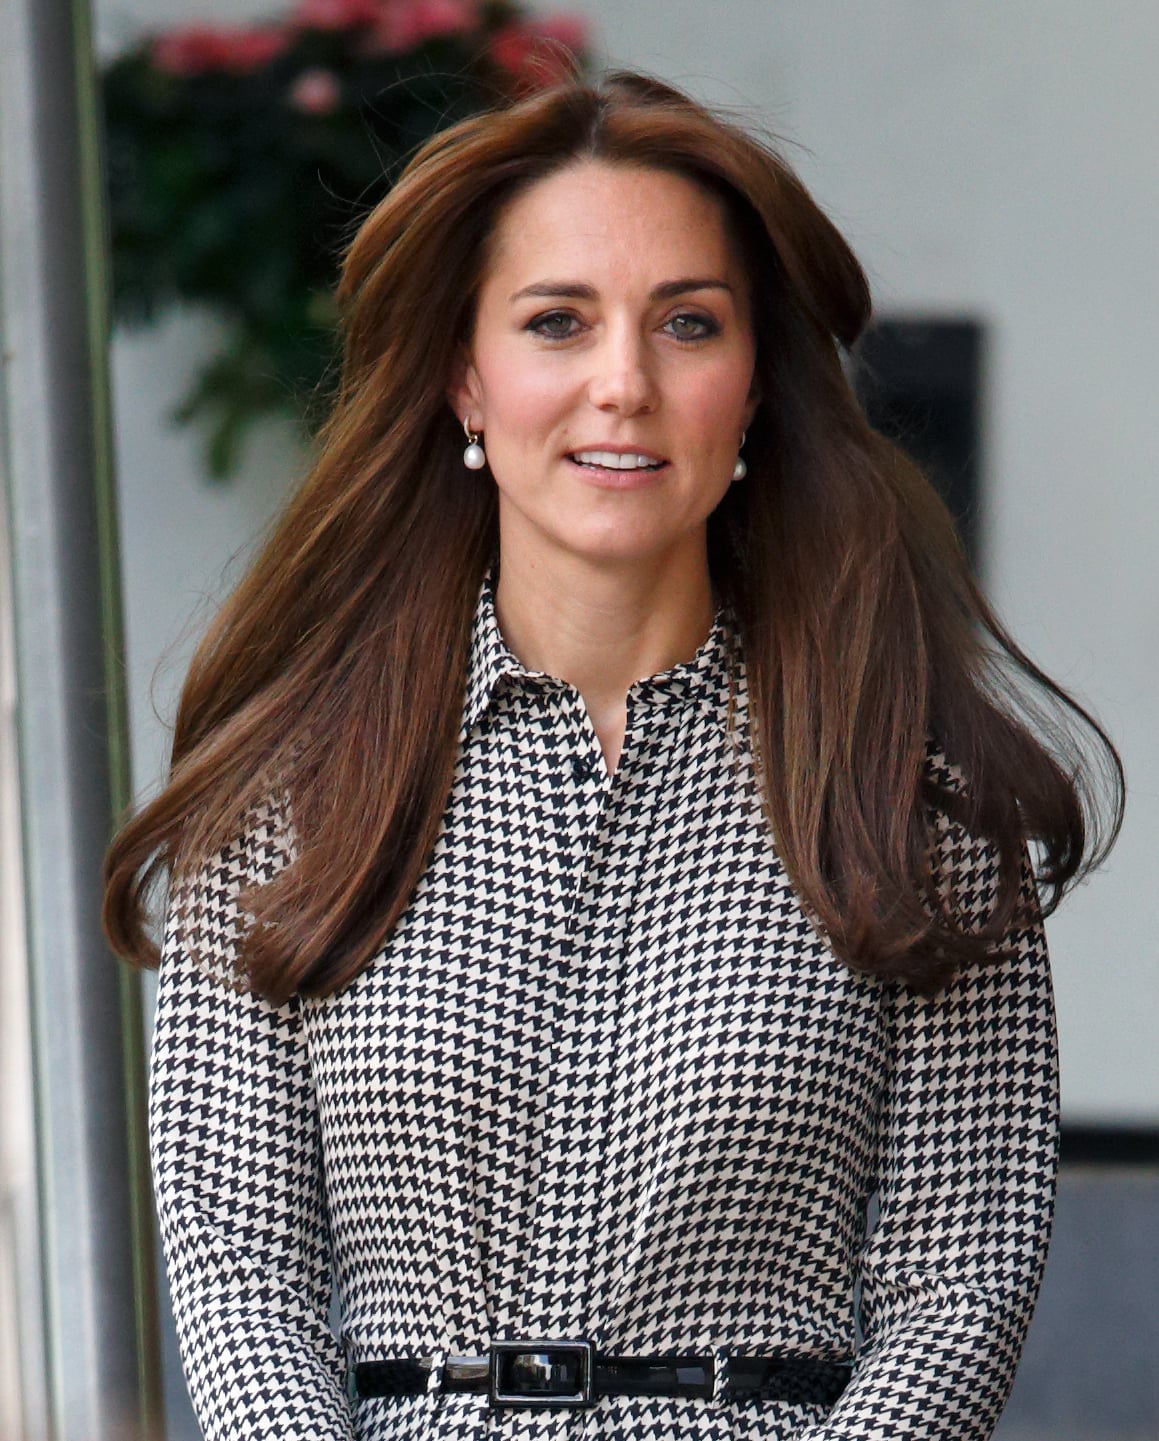 Kiki Gift the Jewelry Kate Middleton Wears to Your Girl, and She'll Love You | POPSUGAR Fashion Photo 2